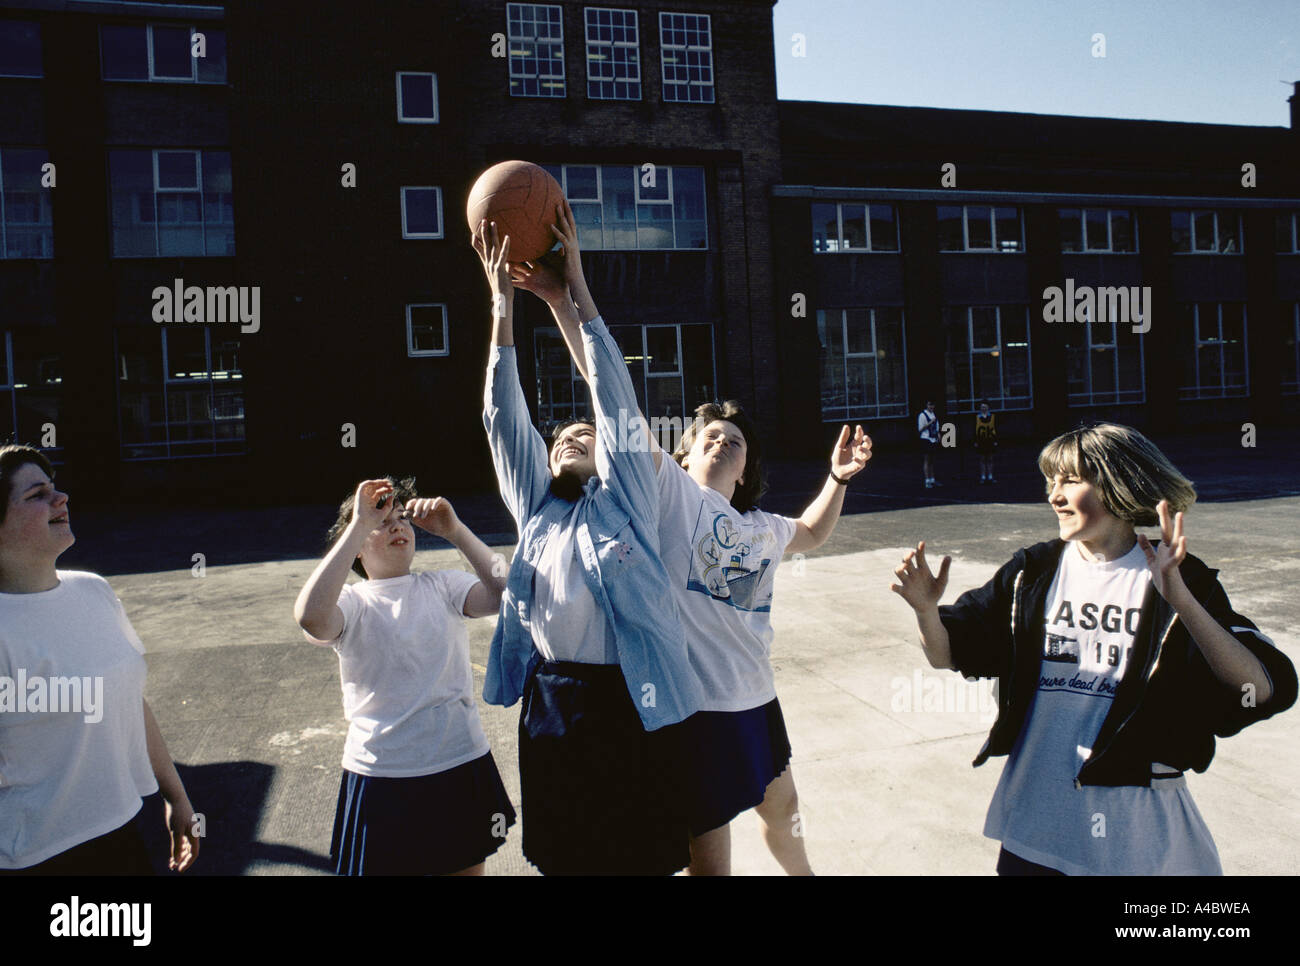 TEENAGE PUPIL PLAYING NETBALL IN SCHOOL PLAYGROUND. GLASGOW HOLYROOD SECONDARY SCHOOL, MAY 1990. Stock Photo